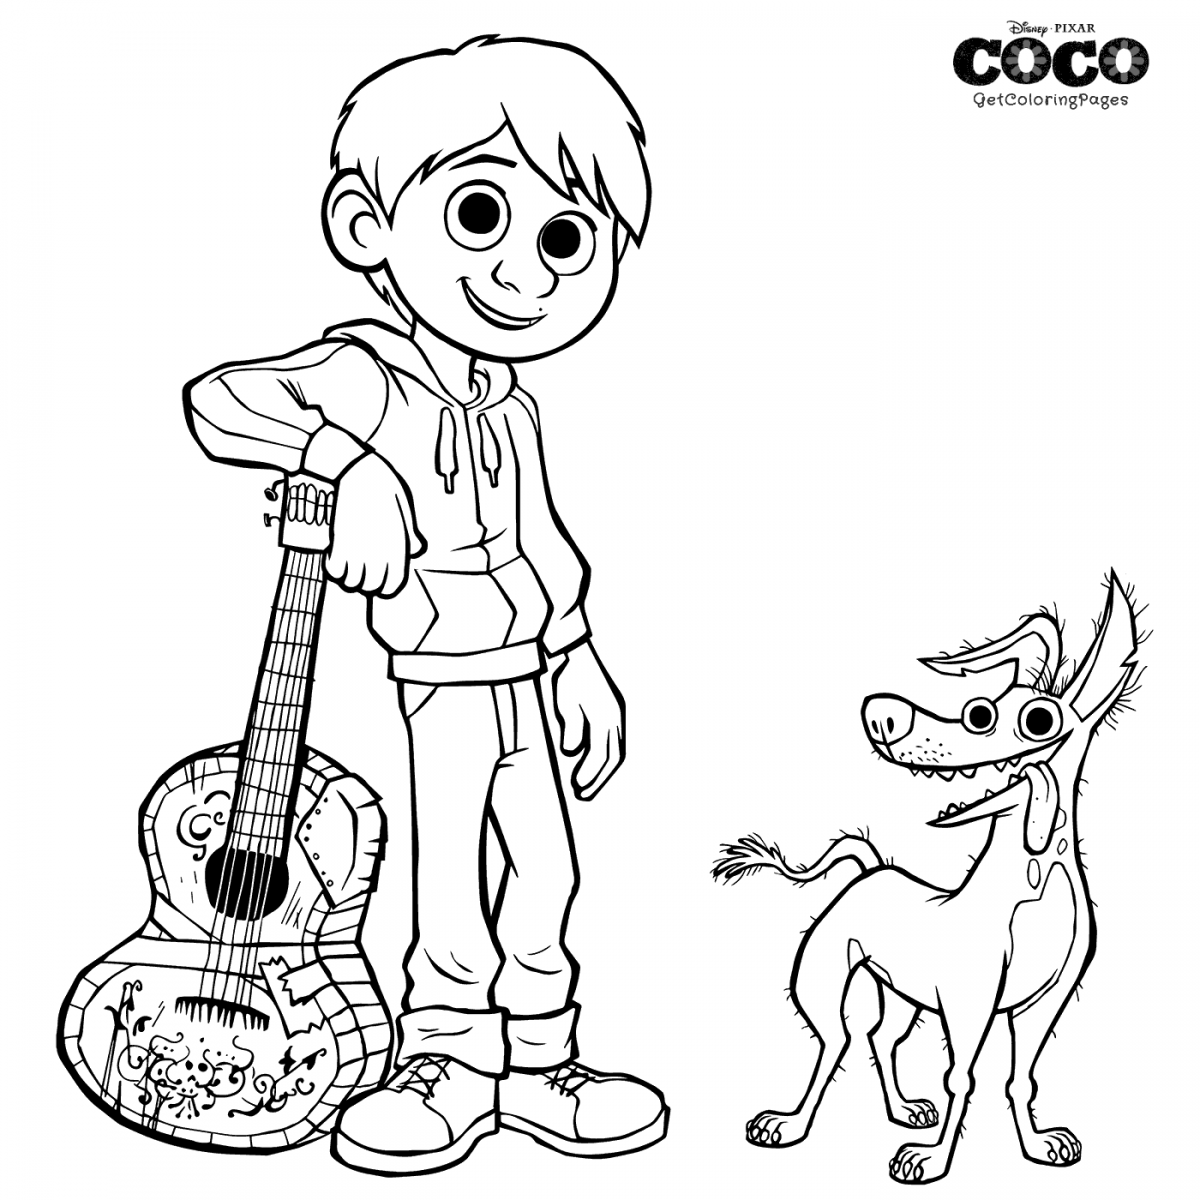 Dante And Miguel Coco Coloring Page | Disney coloring pages ...